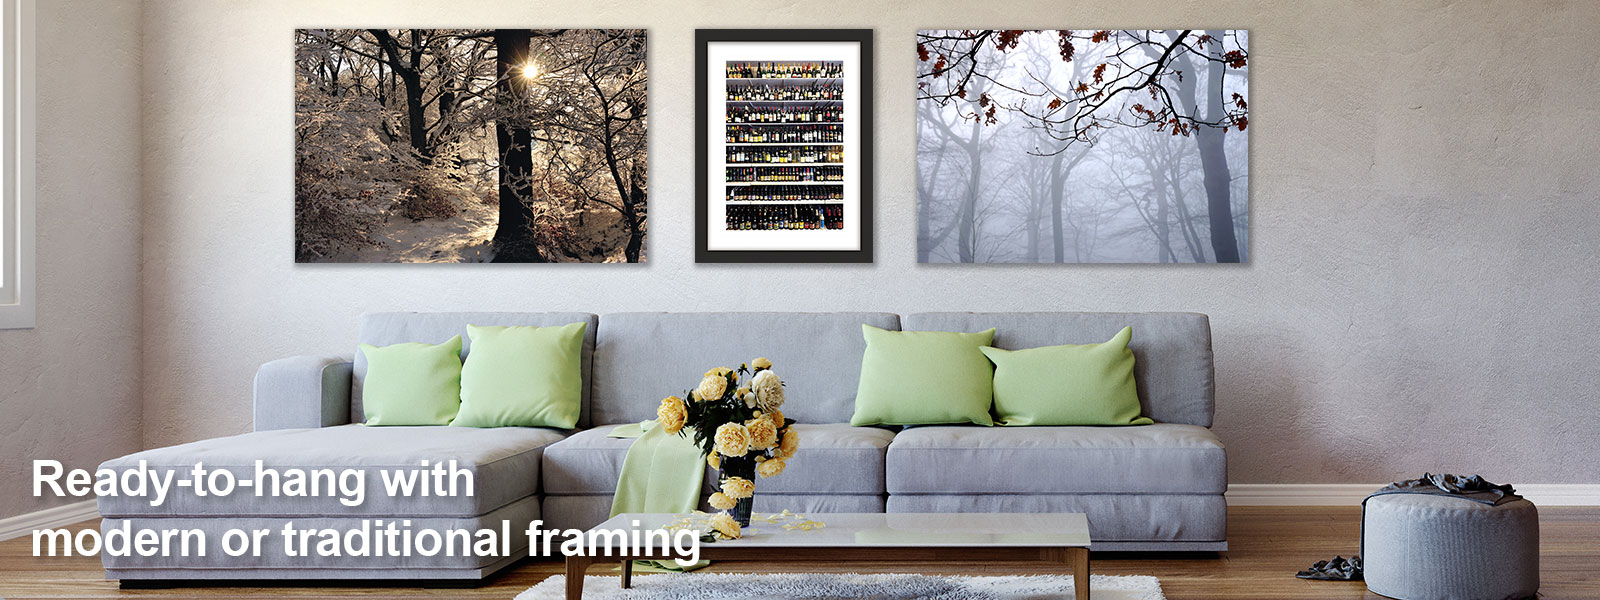 Sample image of product with traditional framing or hidden frames